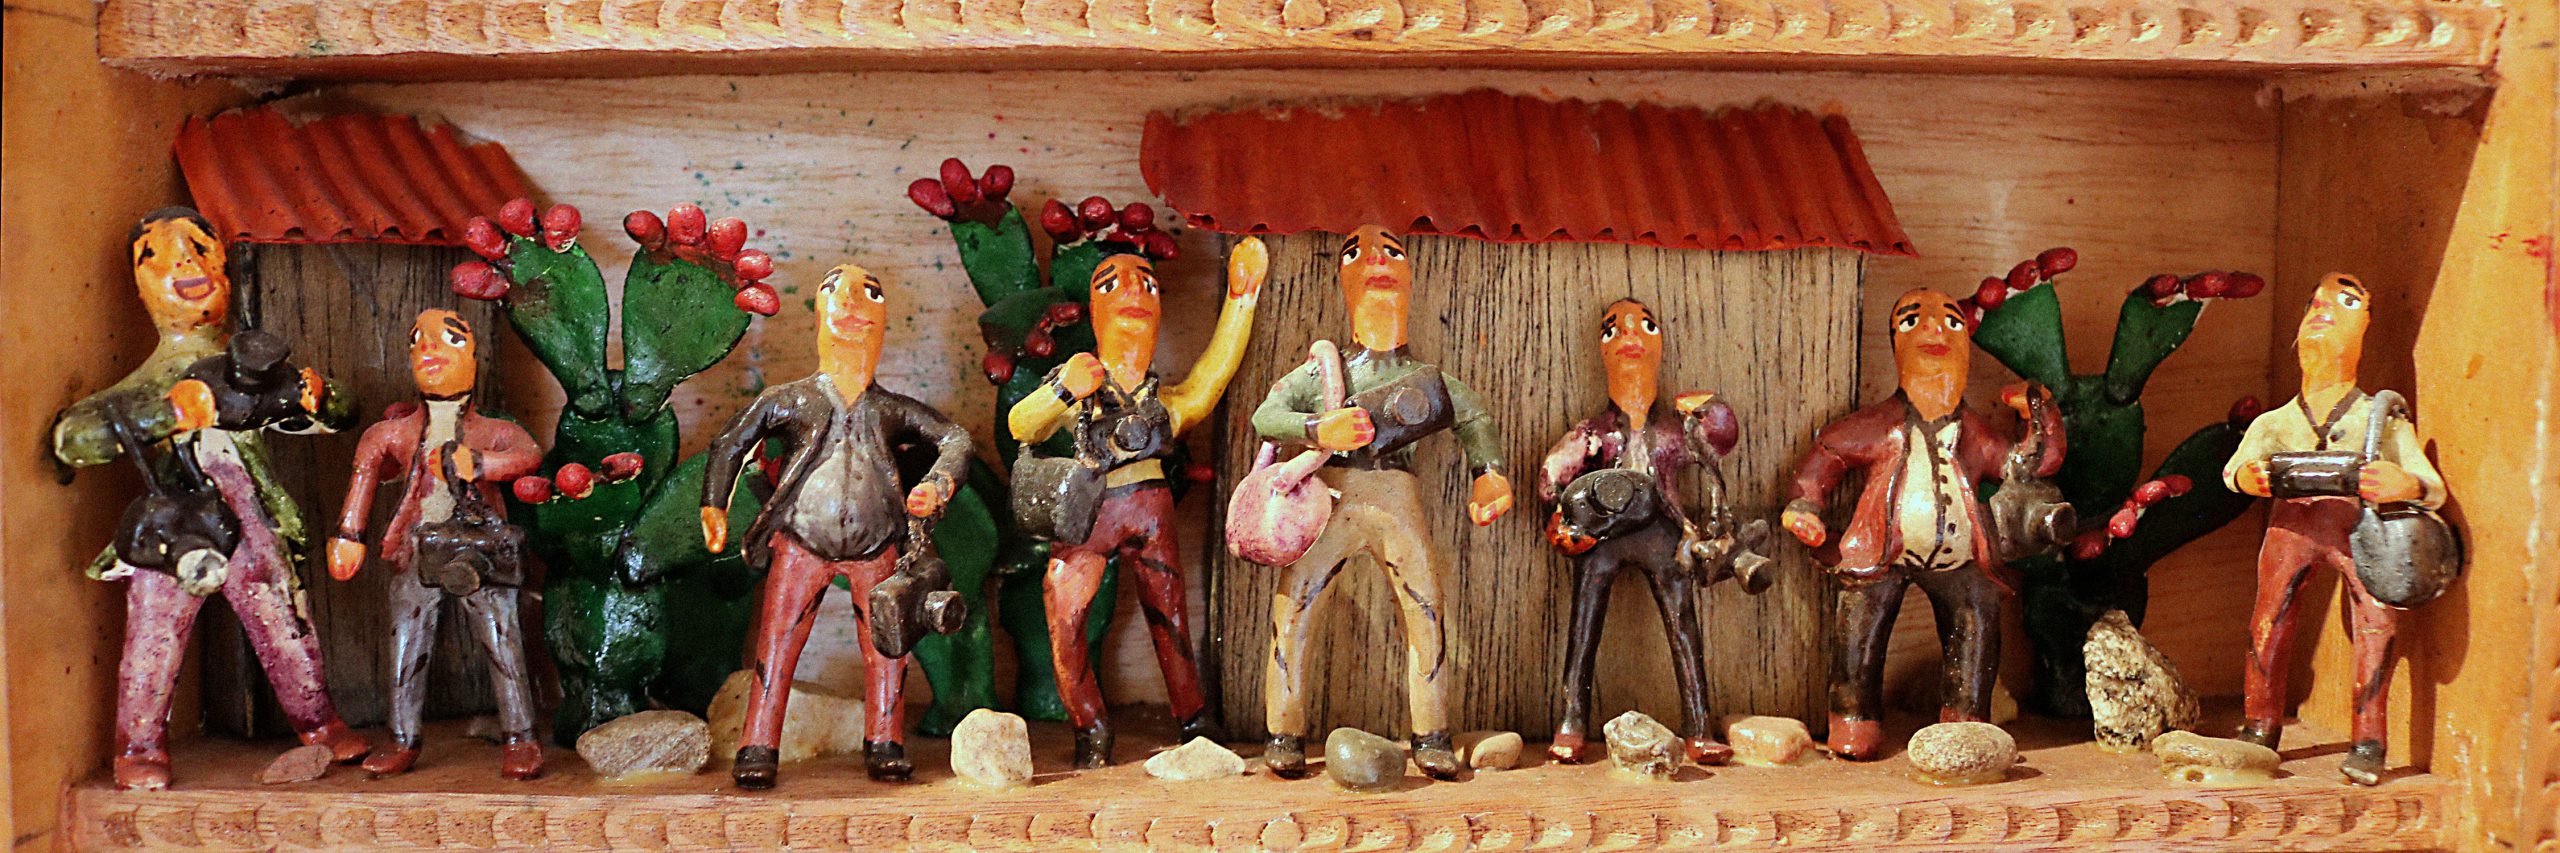 A scene called The Martyrs of Journalism within a retablo. The scene portrays eight men standing together holding bags and cameras. The men stand in from of the sides of two buildings with wooden walls and red, tile roofs. In the background are also three green cactuses with red flowers. The group around the men is scattered with rocks.